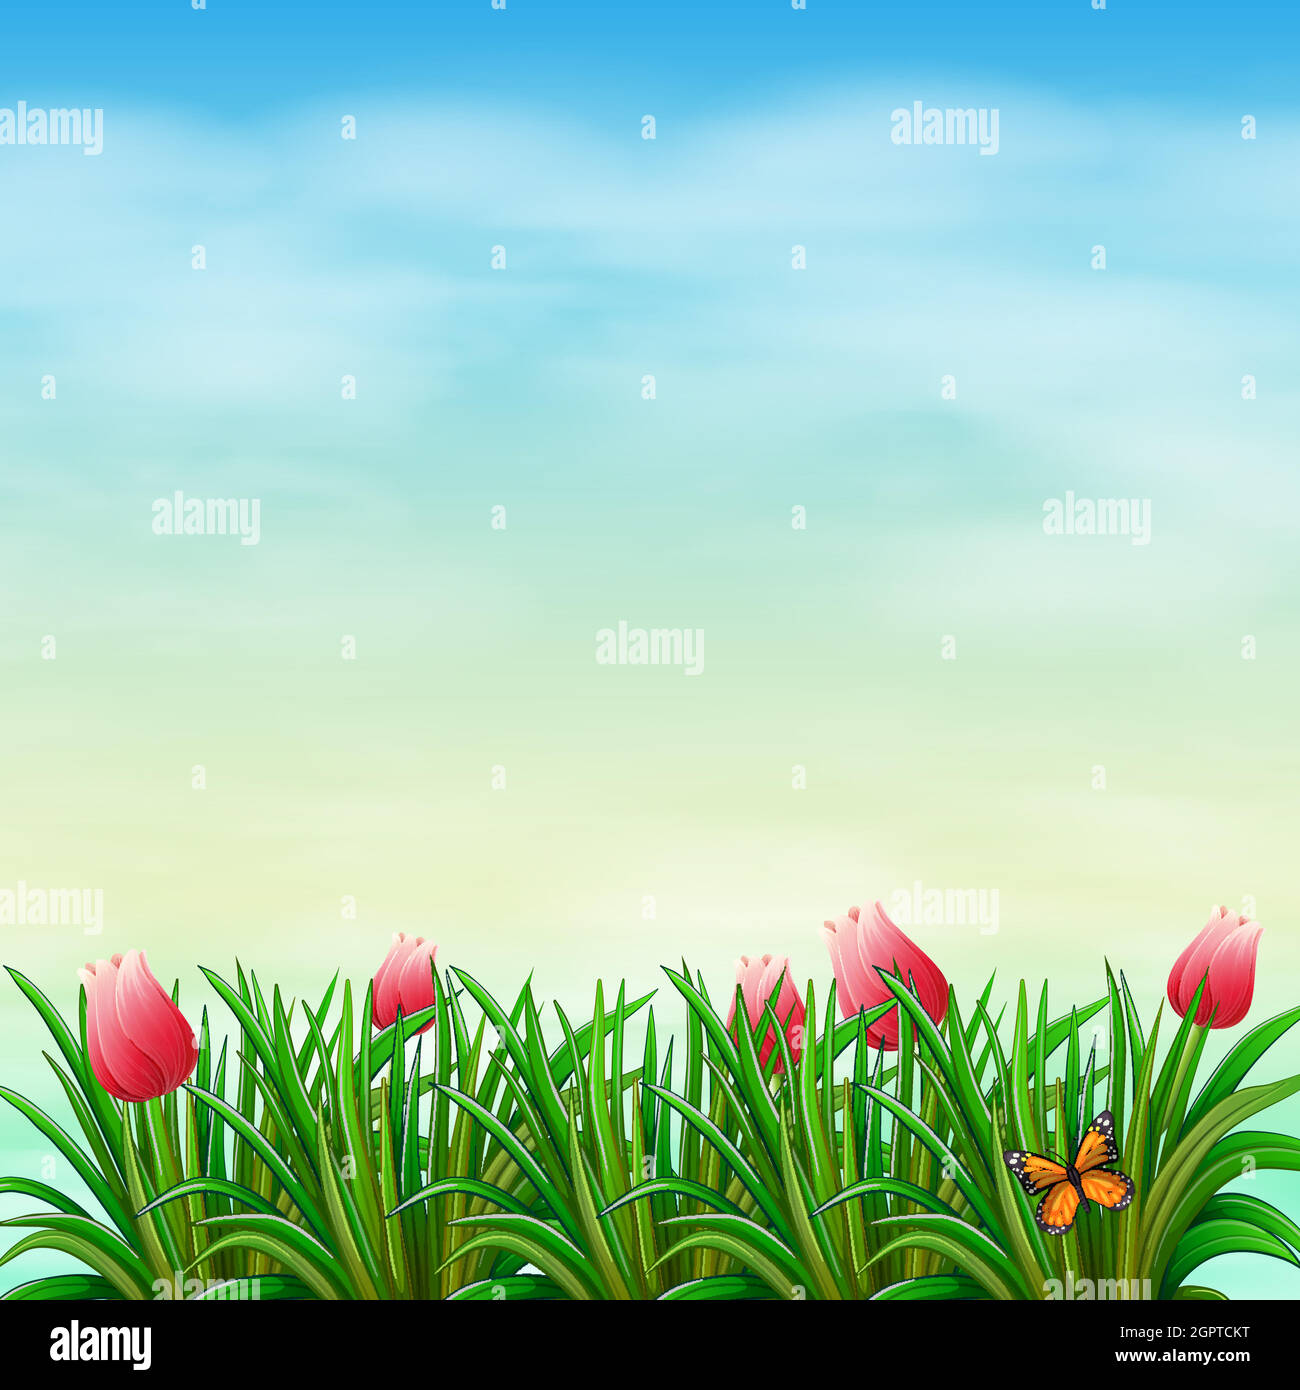 A garden with red flowers Stock Vector